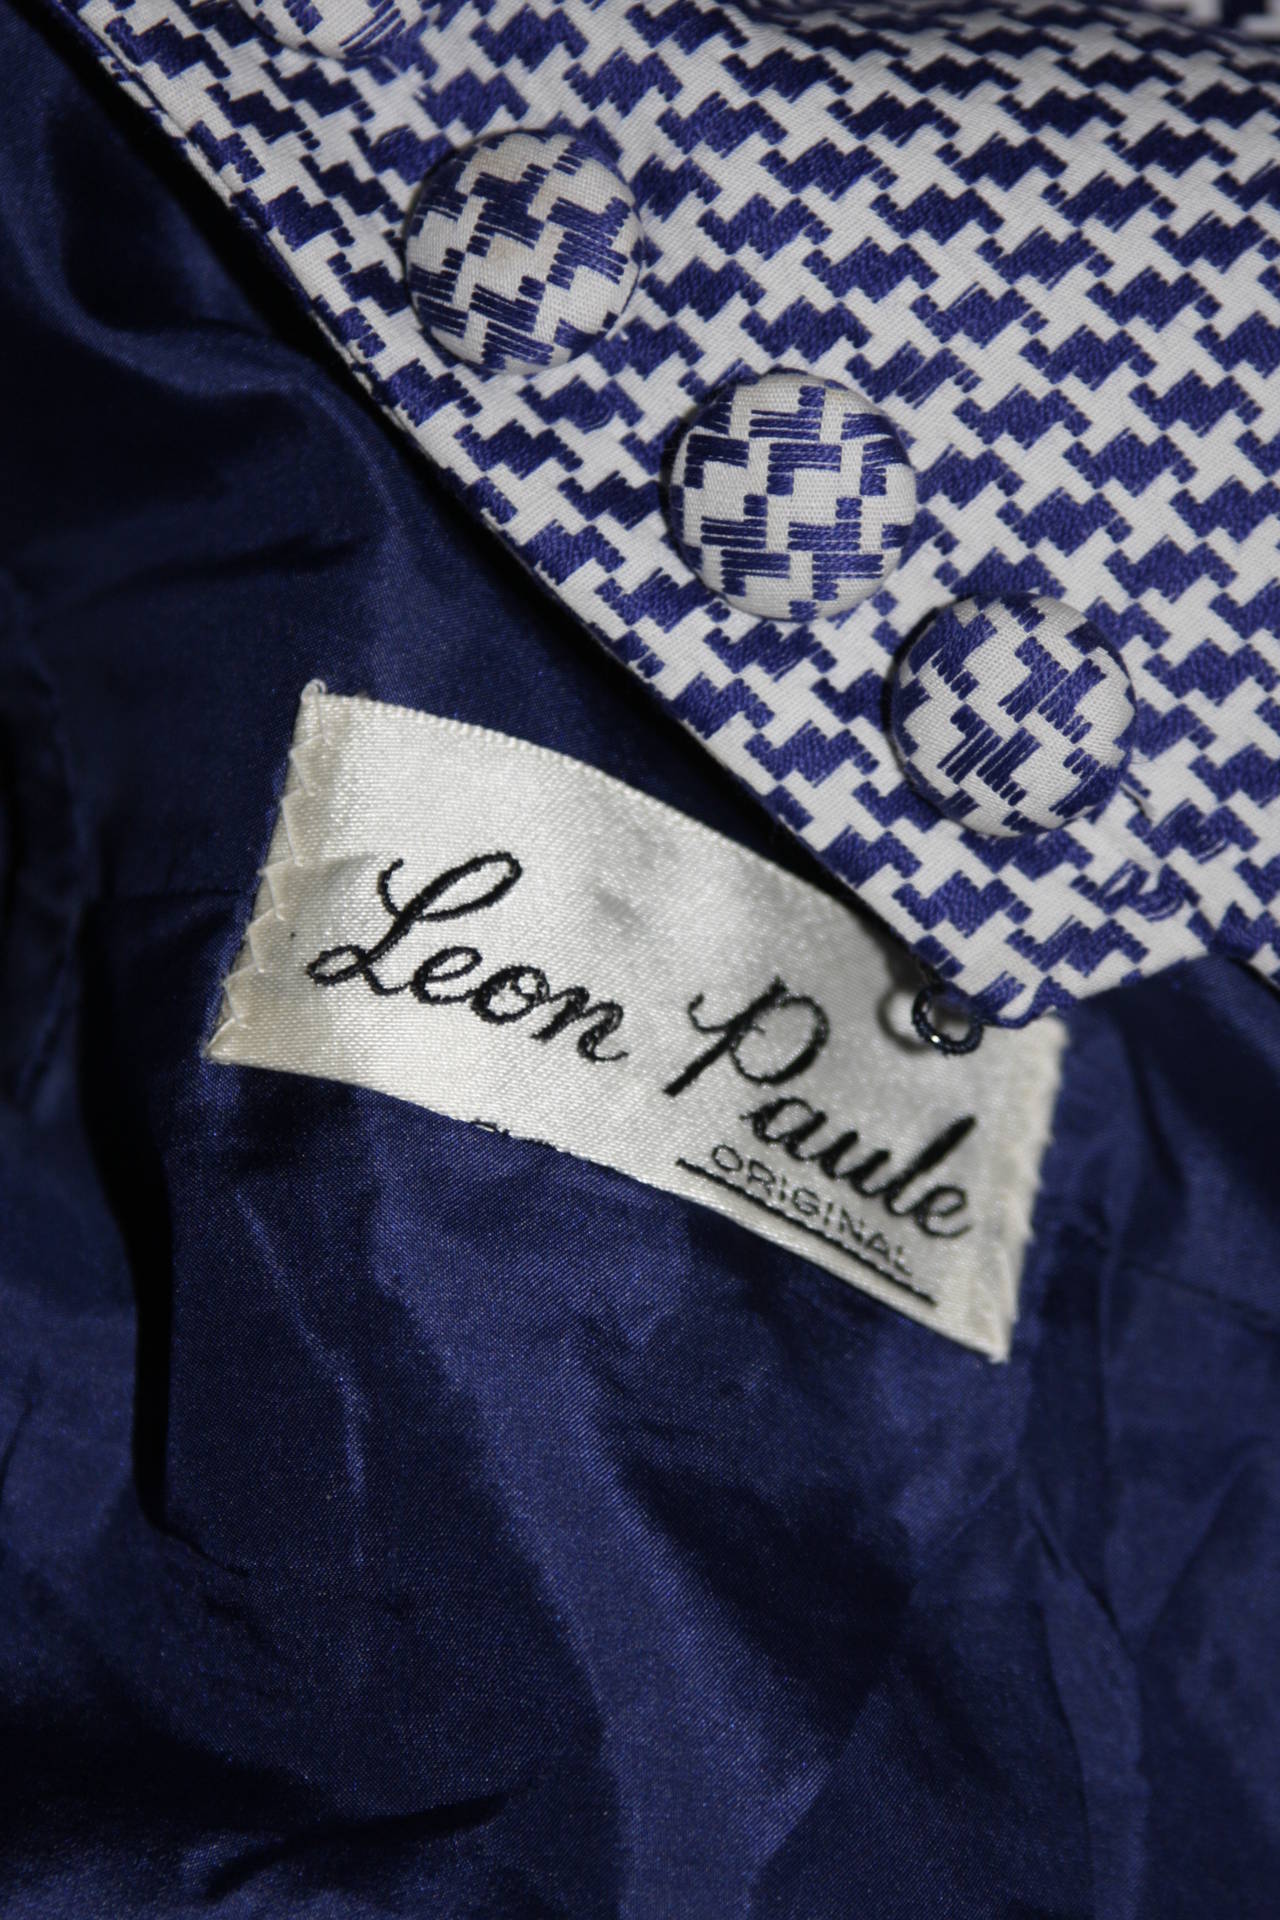 Leon Paule Sculptural Royal Blue & White Fitted Houndstooth Jacket & Skirt Suit 4